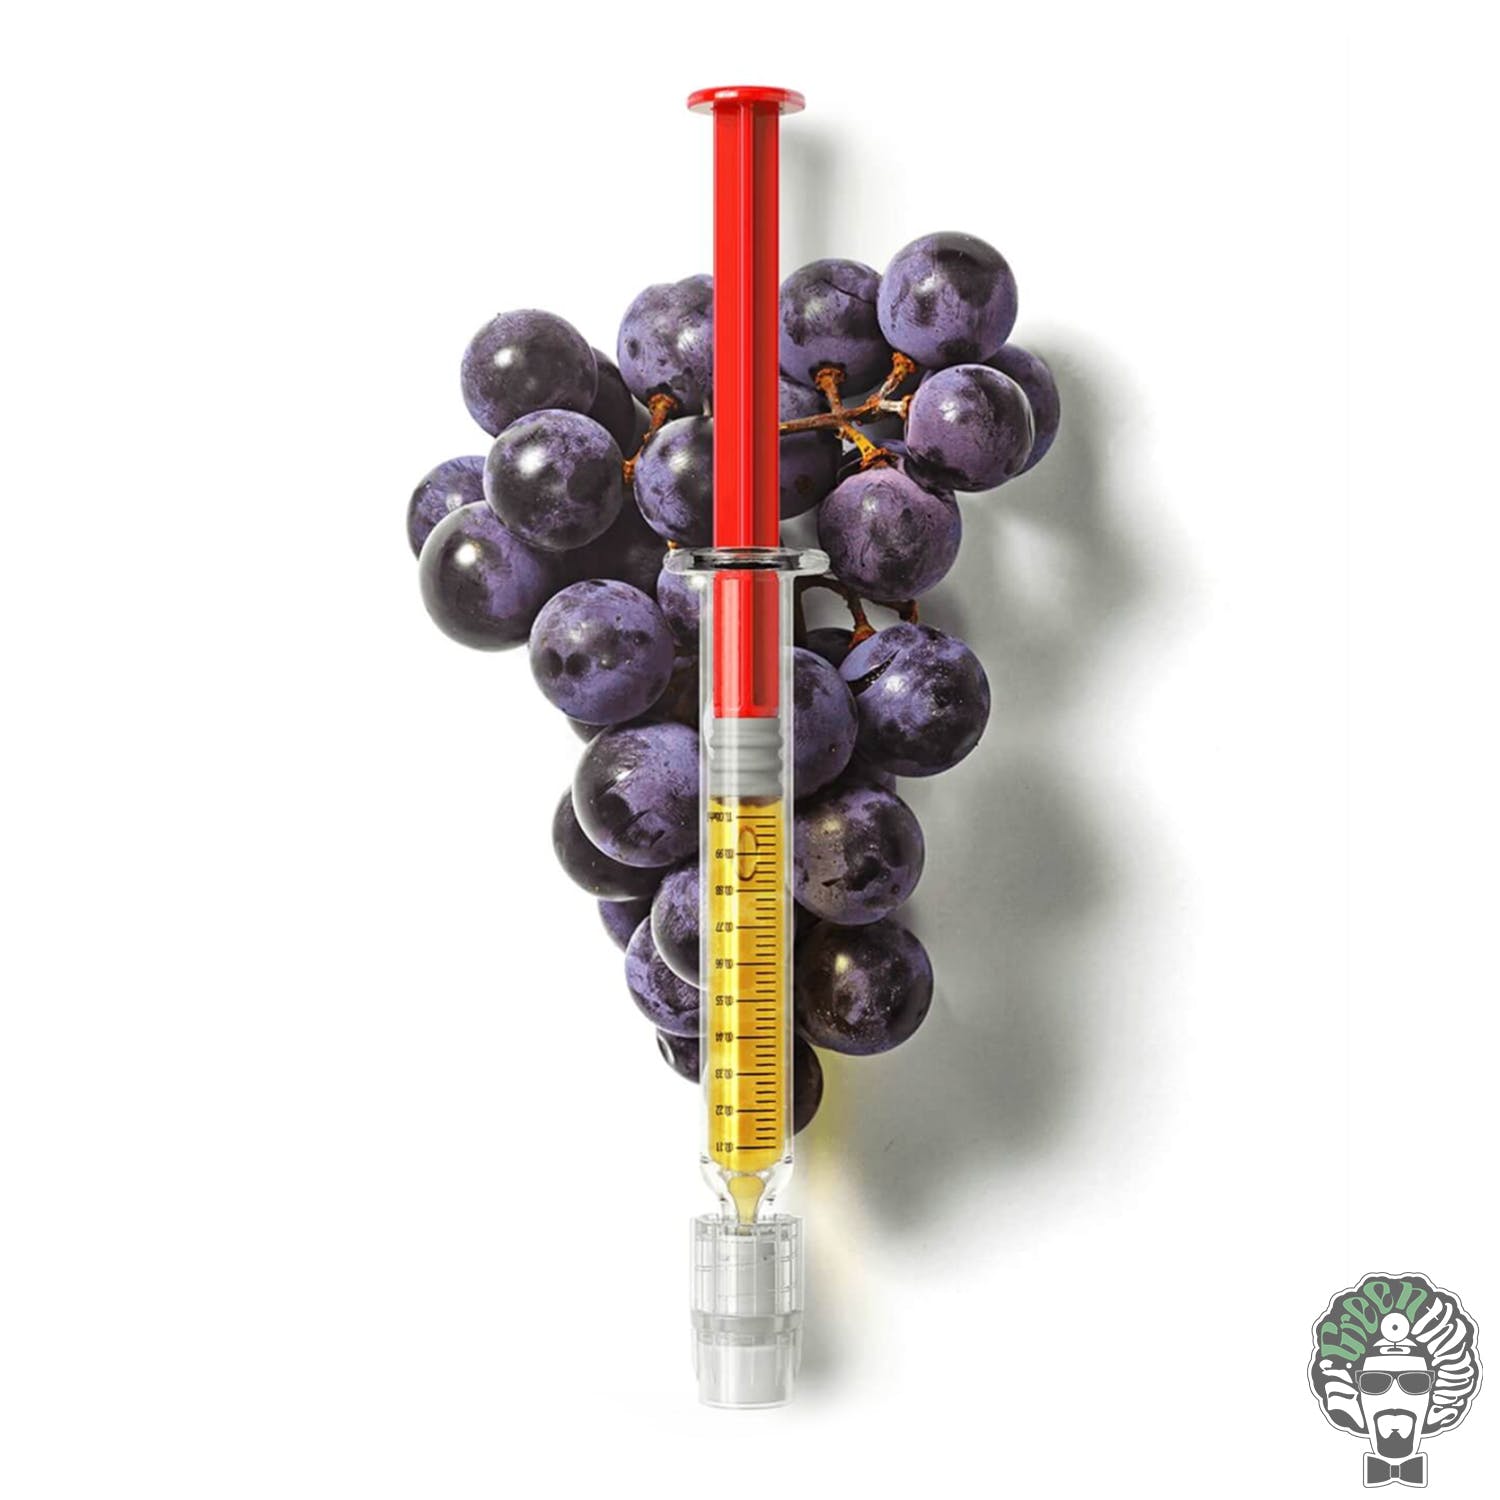 Grand Daddy Purple .8 Refillable Cartridge Tincture By Bloom